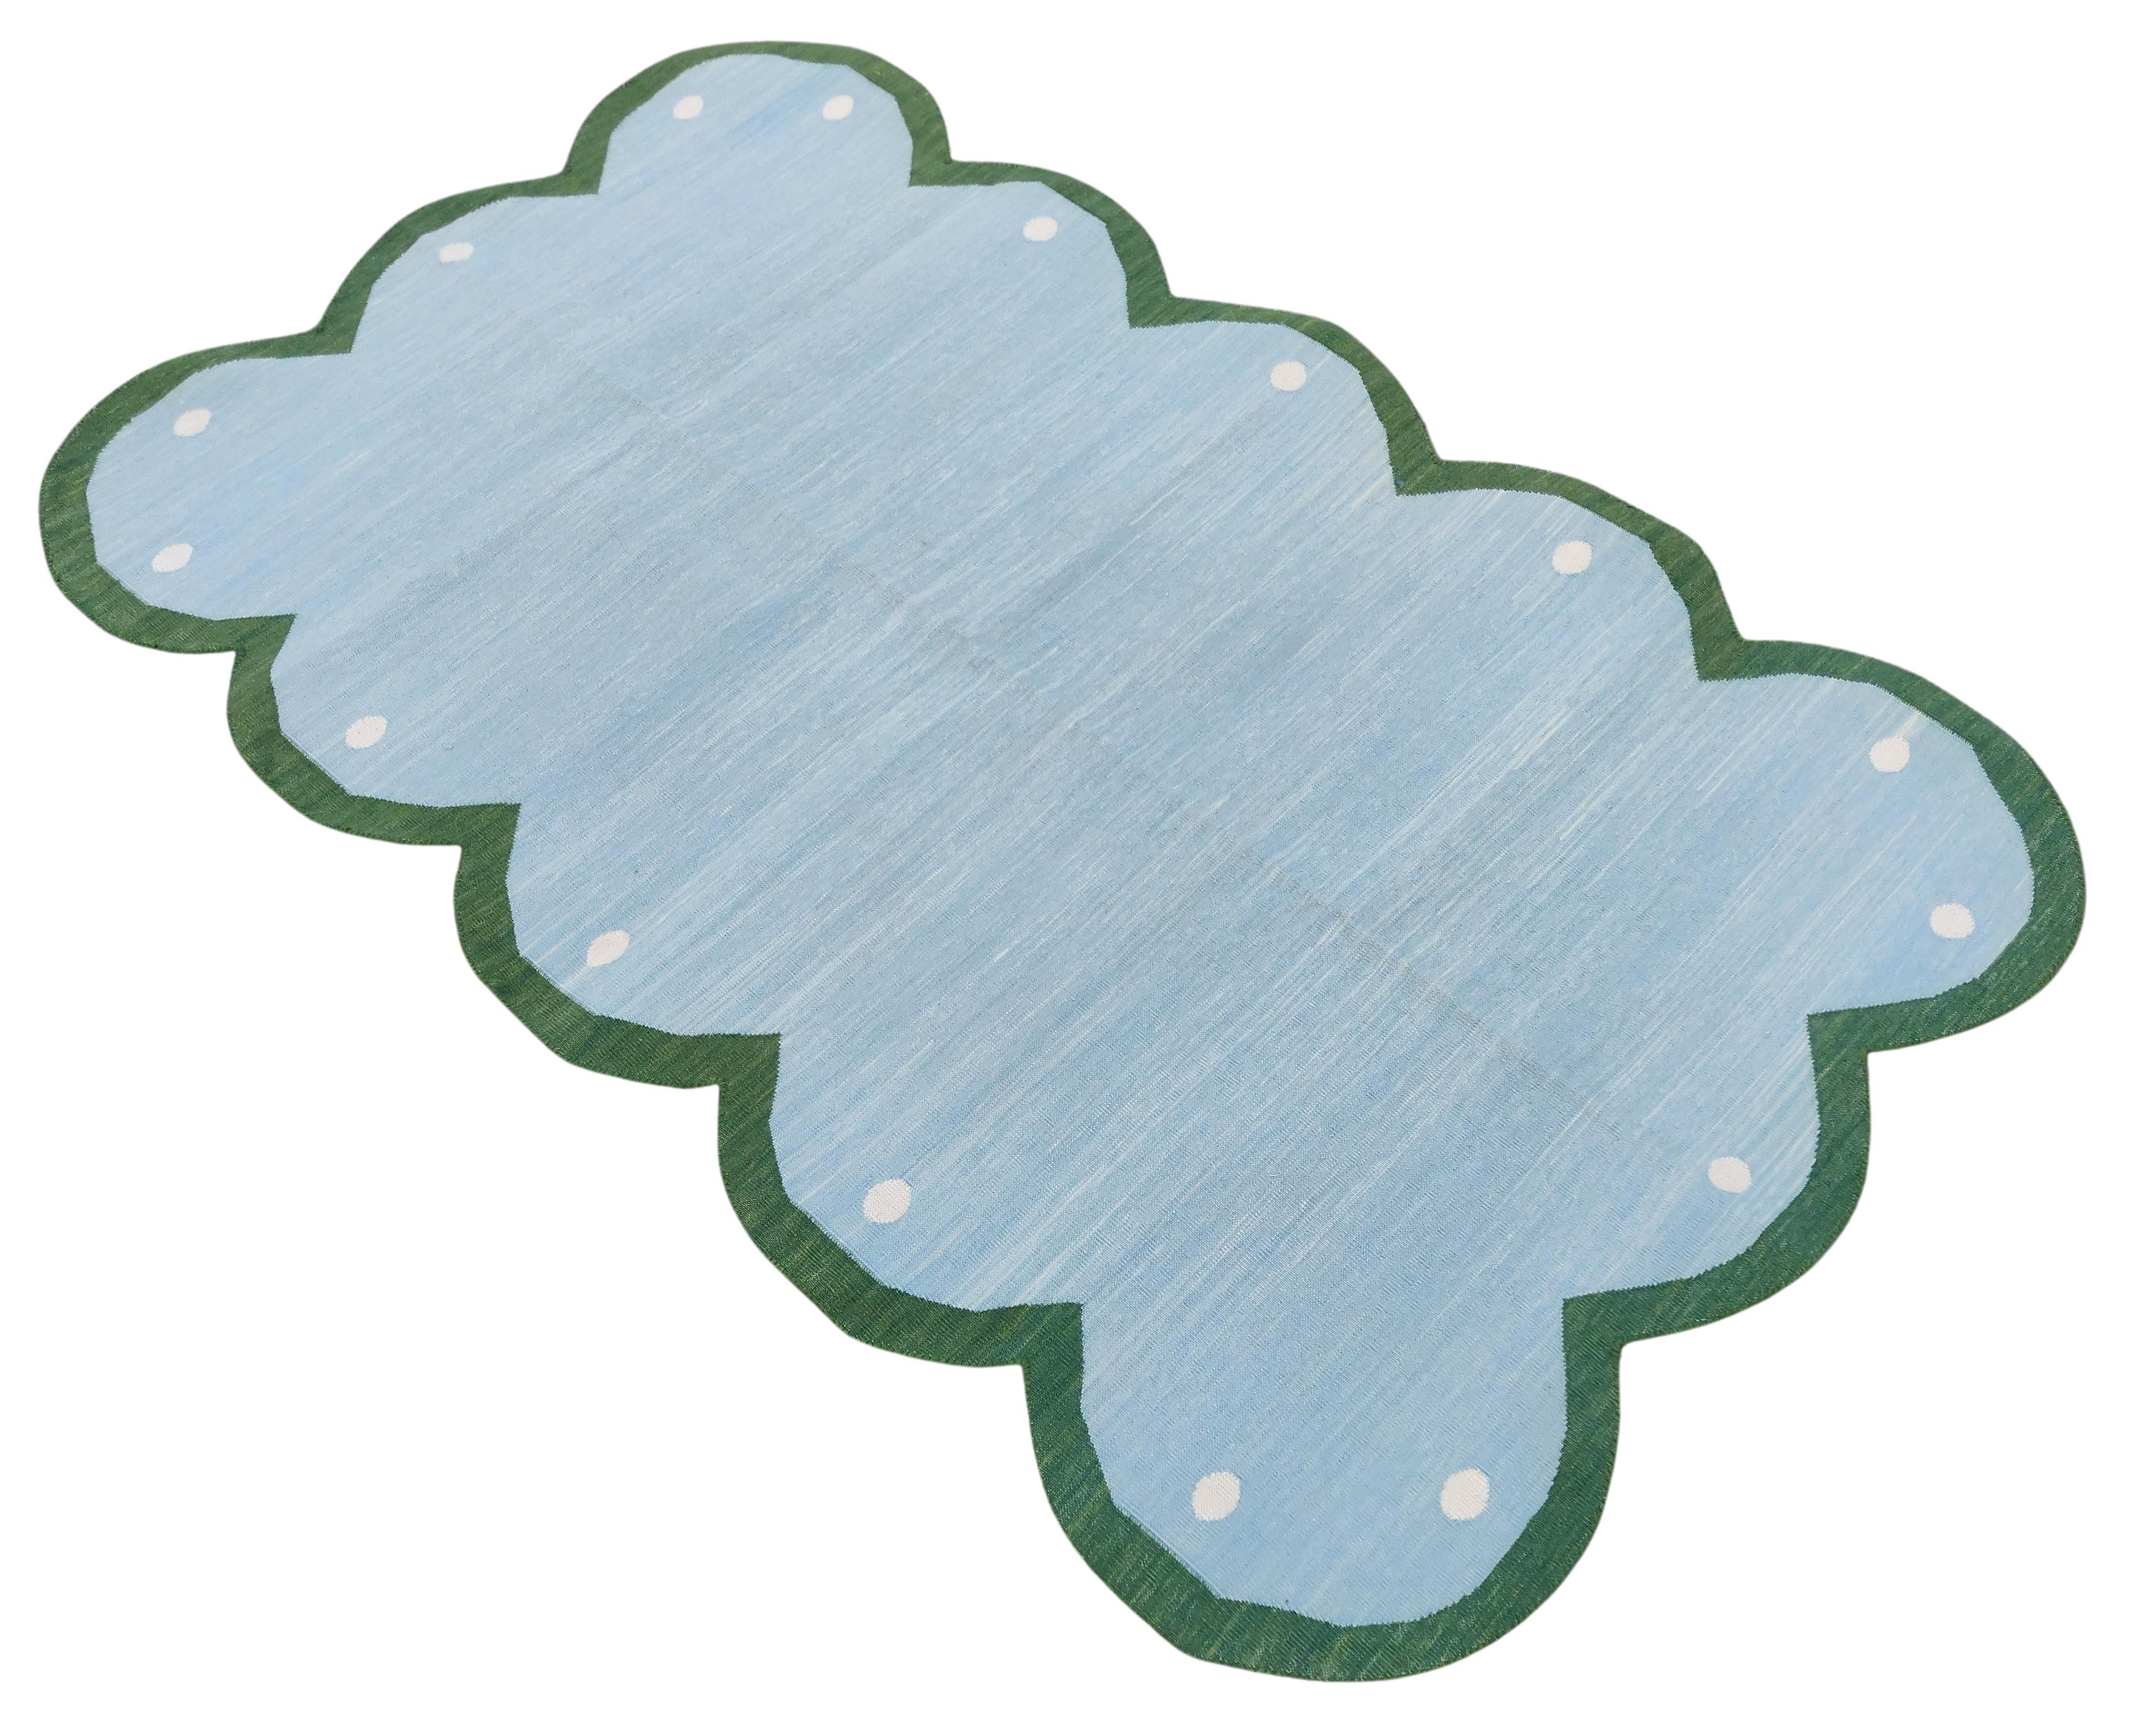 Cotton Vegetable Dyed Sky Blue & Forest Green Four Sided Scalloped Rug-6'x9' 
(Scallops runs on all 4 Sides)
These special flat-weave dhurries are hand-woven with 15 ply 100% cotton yarn. Due to the special manufacturing techniques used to create